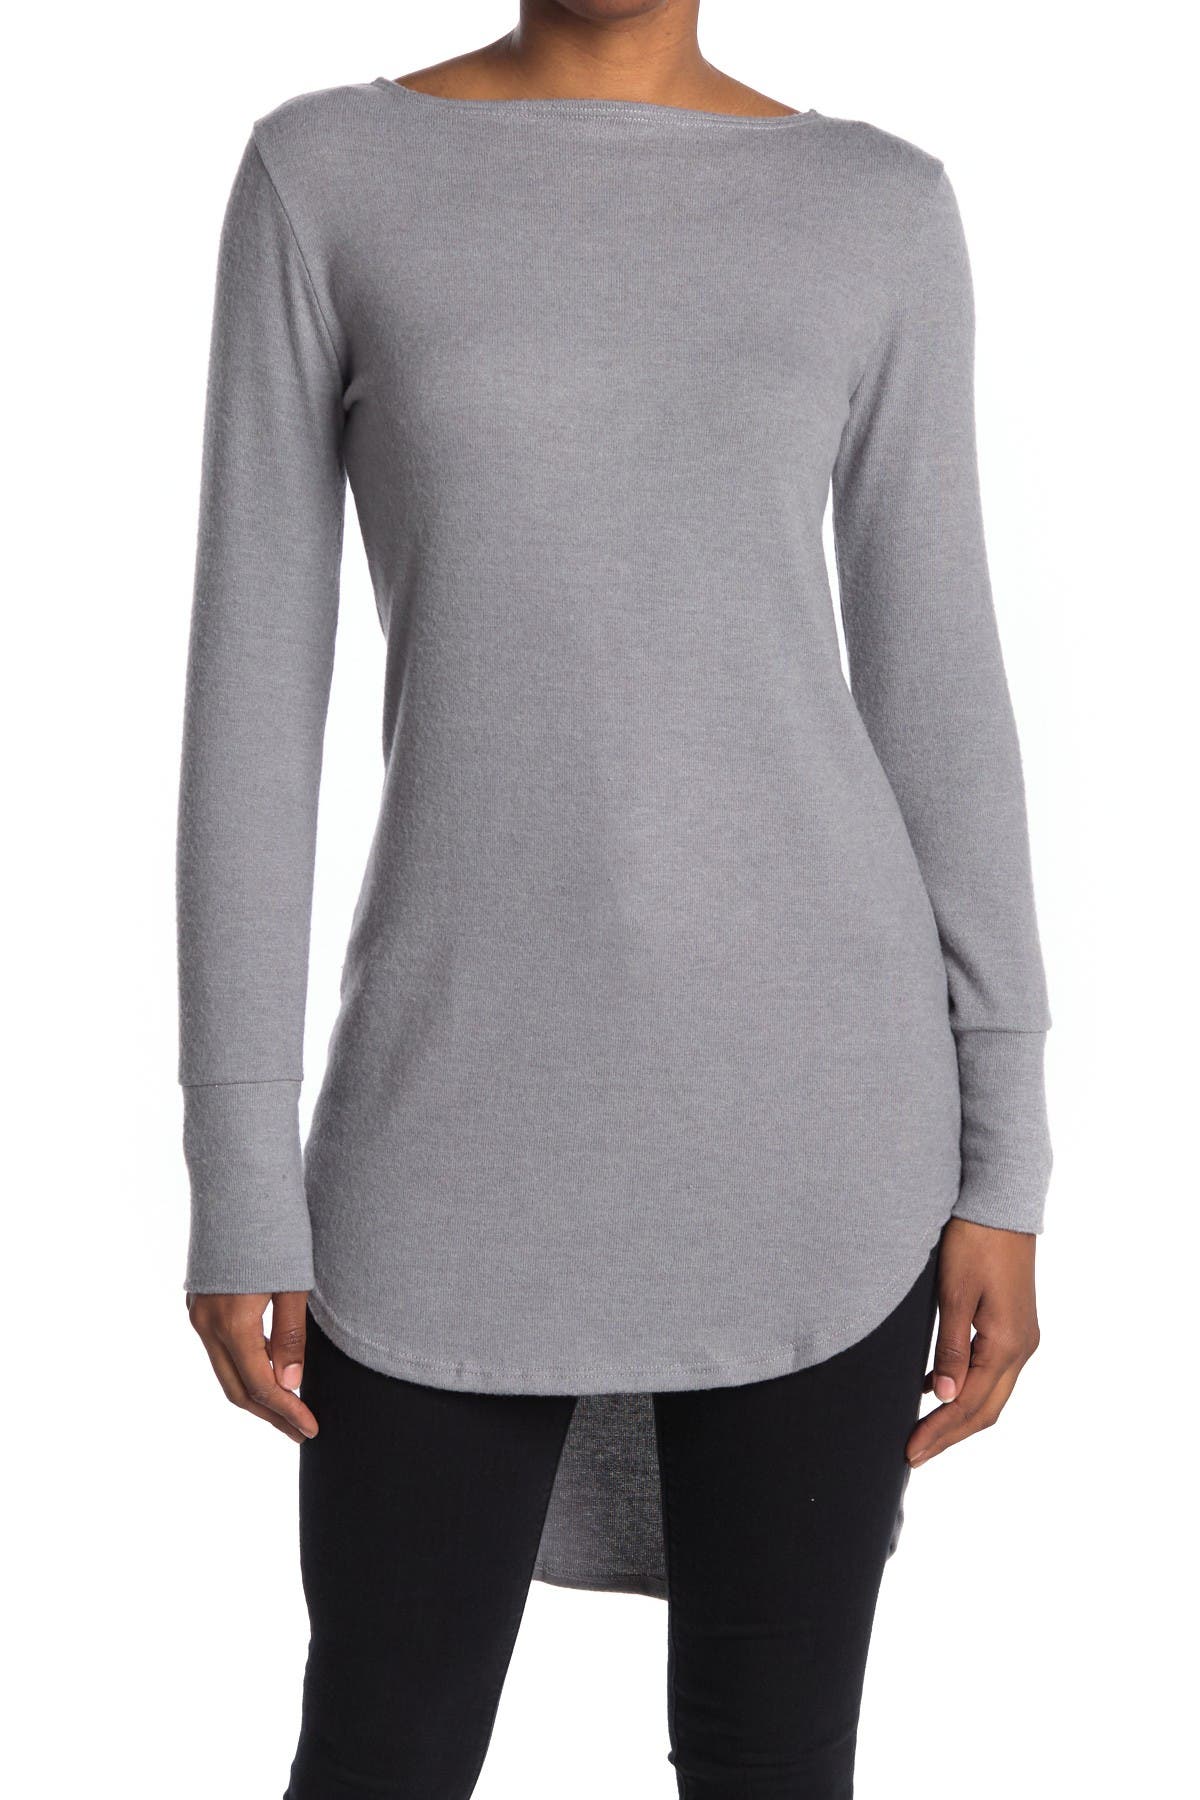 Go Couture Graphic Boatneck Top In Dark Grey3